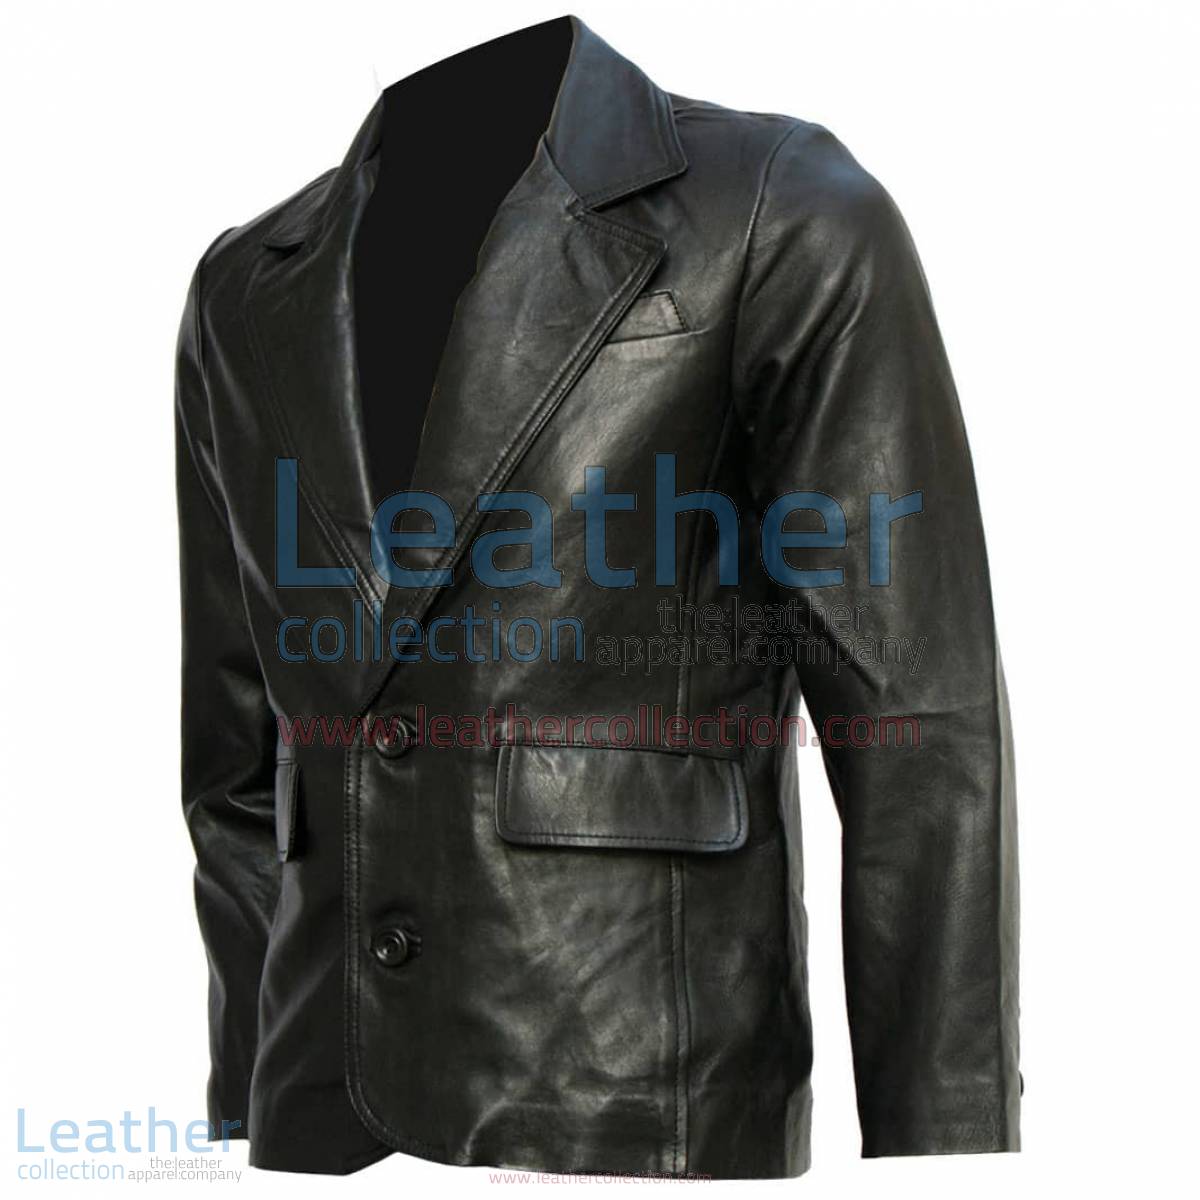 Mission Impossible Tom Cruise Black Leather Blazer | blazer black,black leather blazer